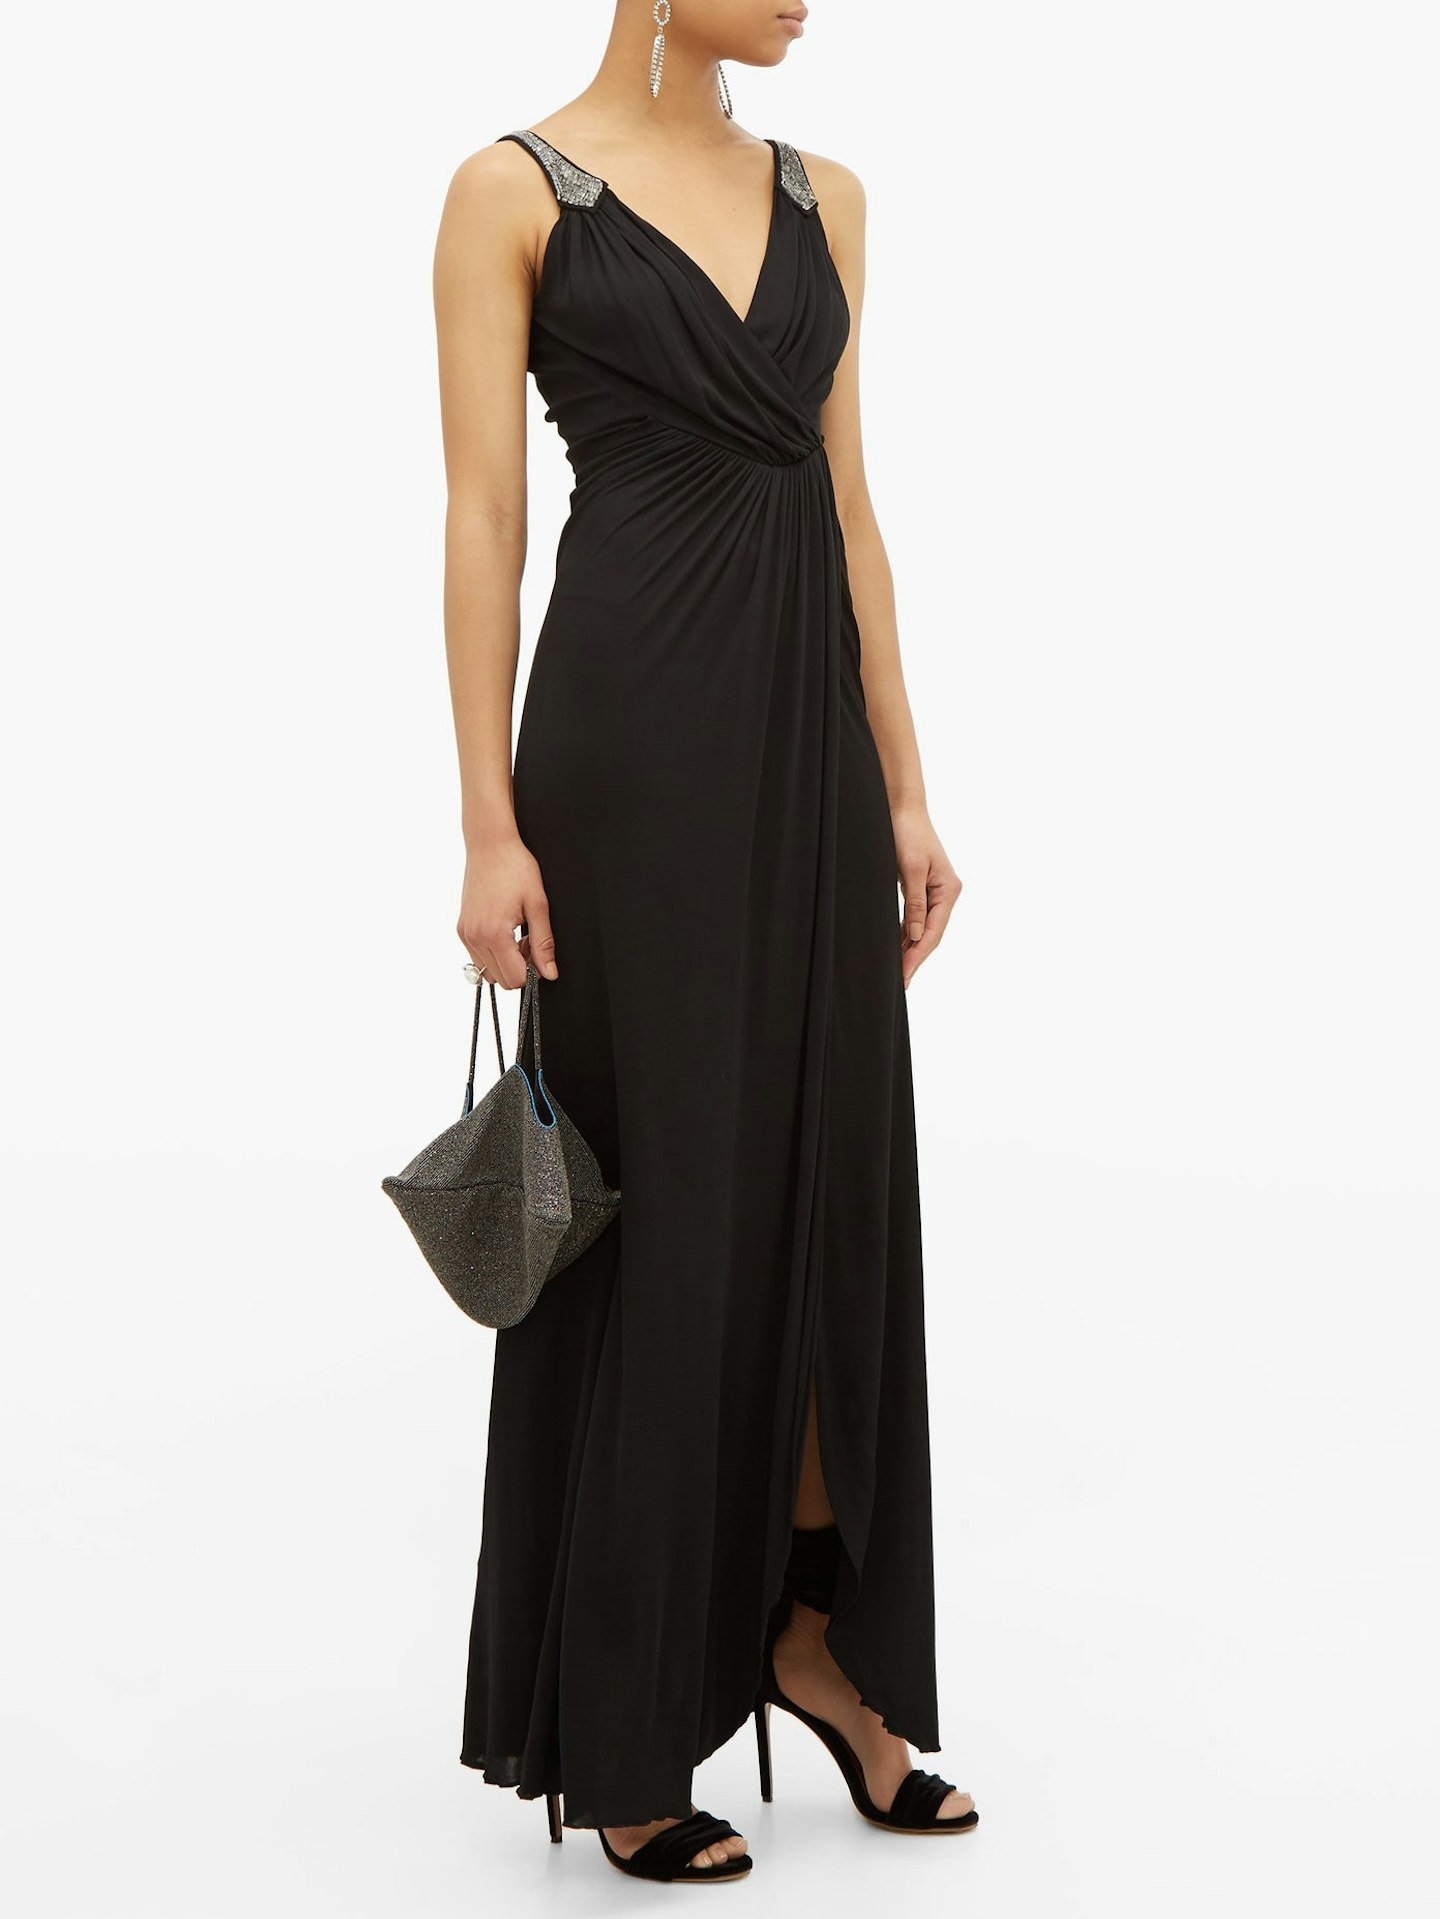 WILLIAM VINTAGE - Ossie Clark, beaded wrap dress, £925 available at matchesfashion.com